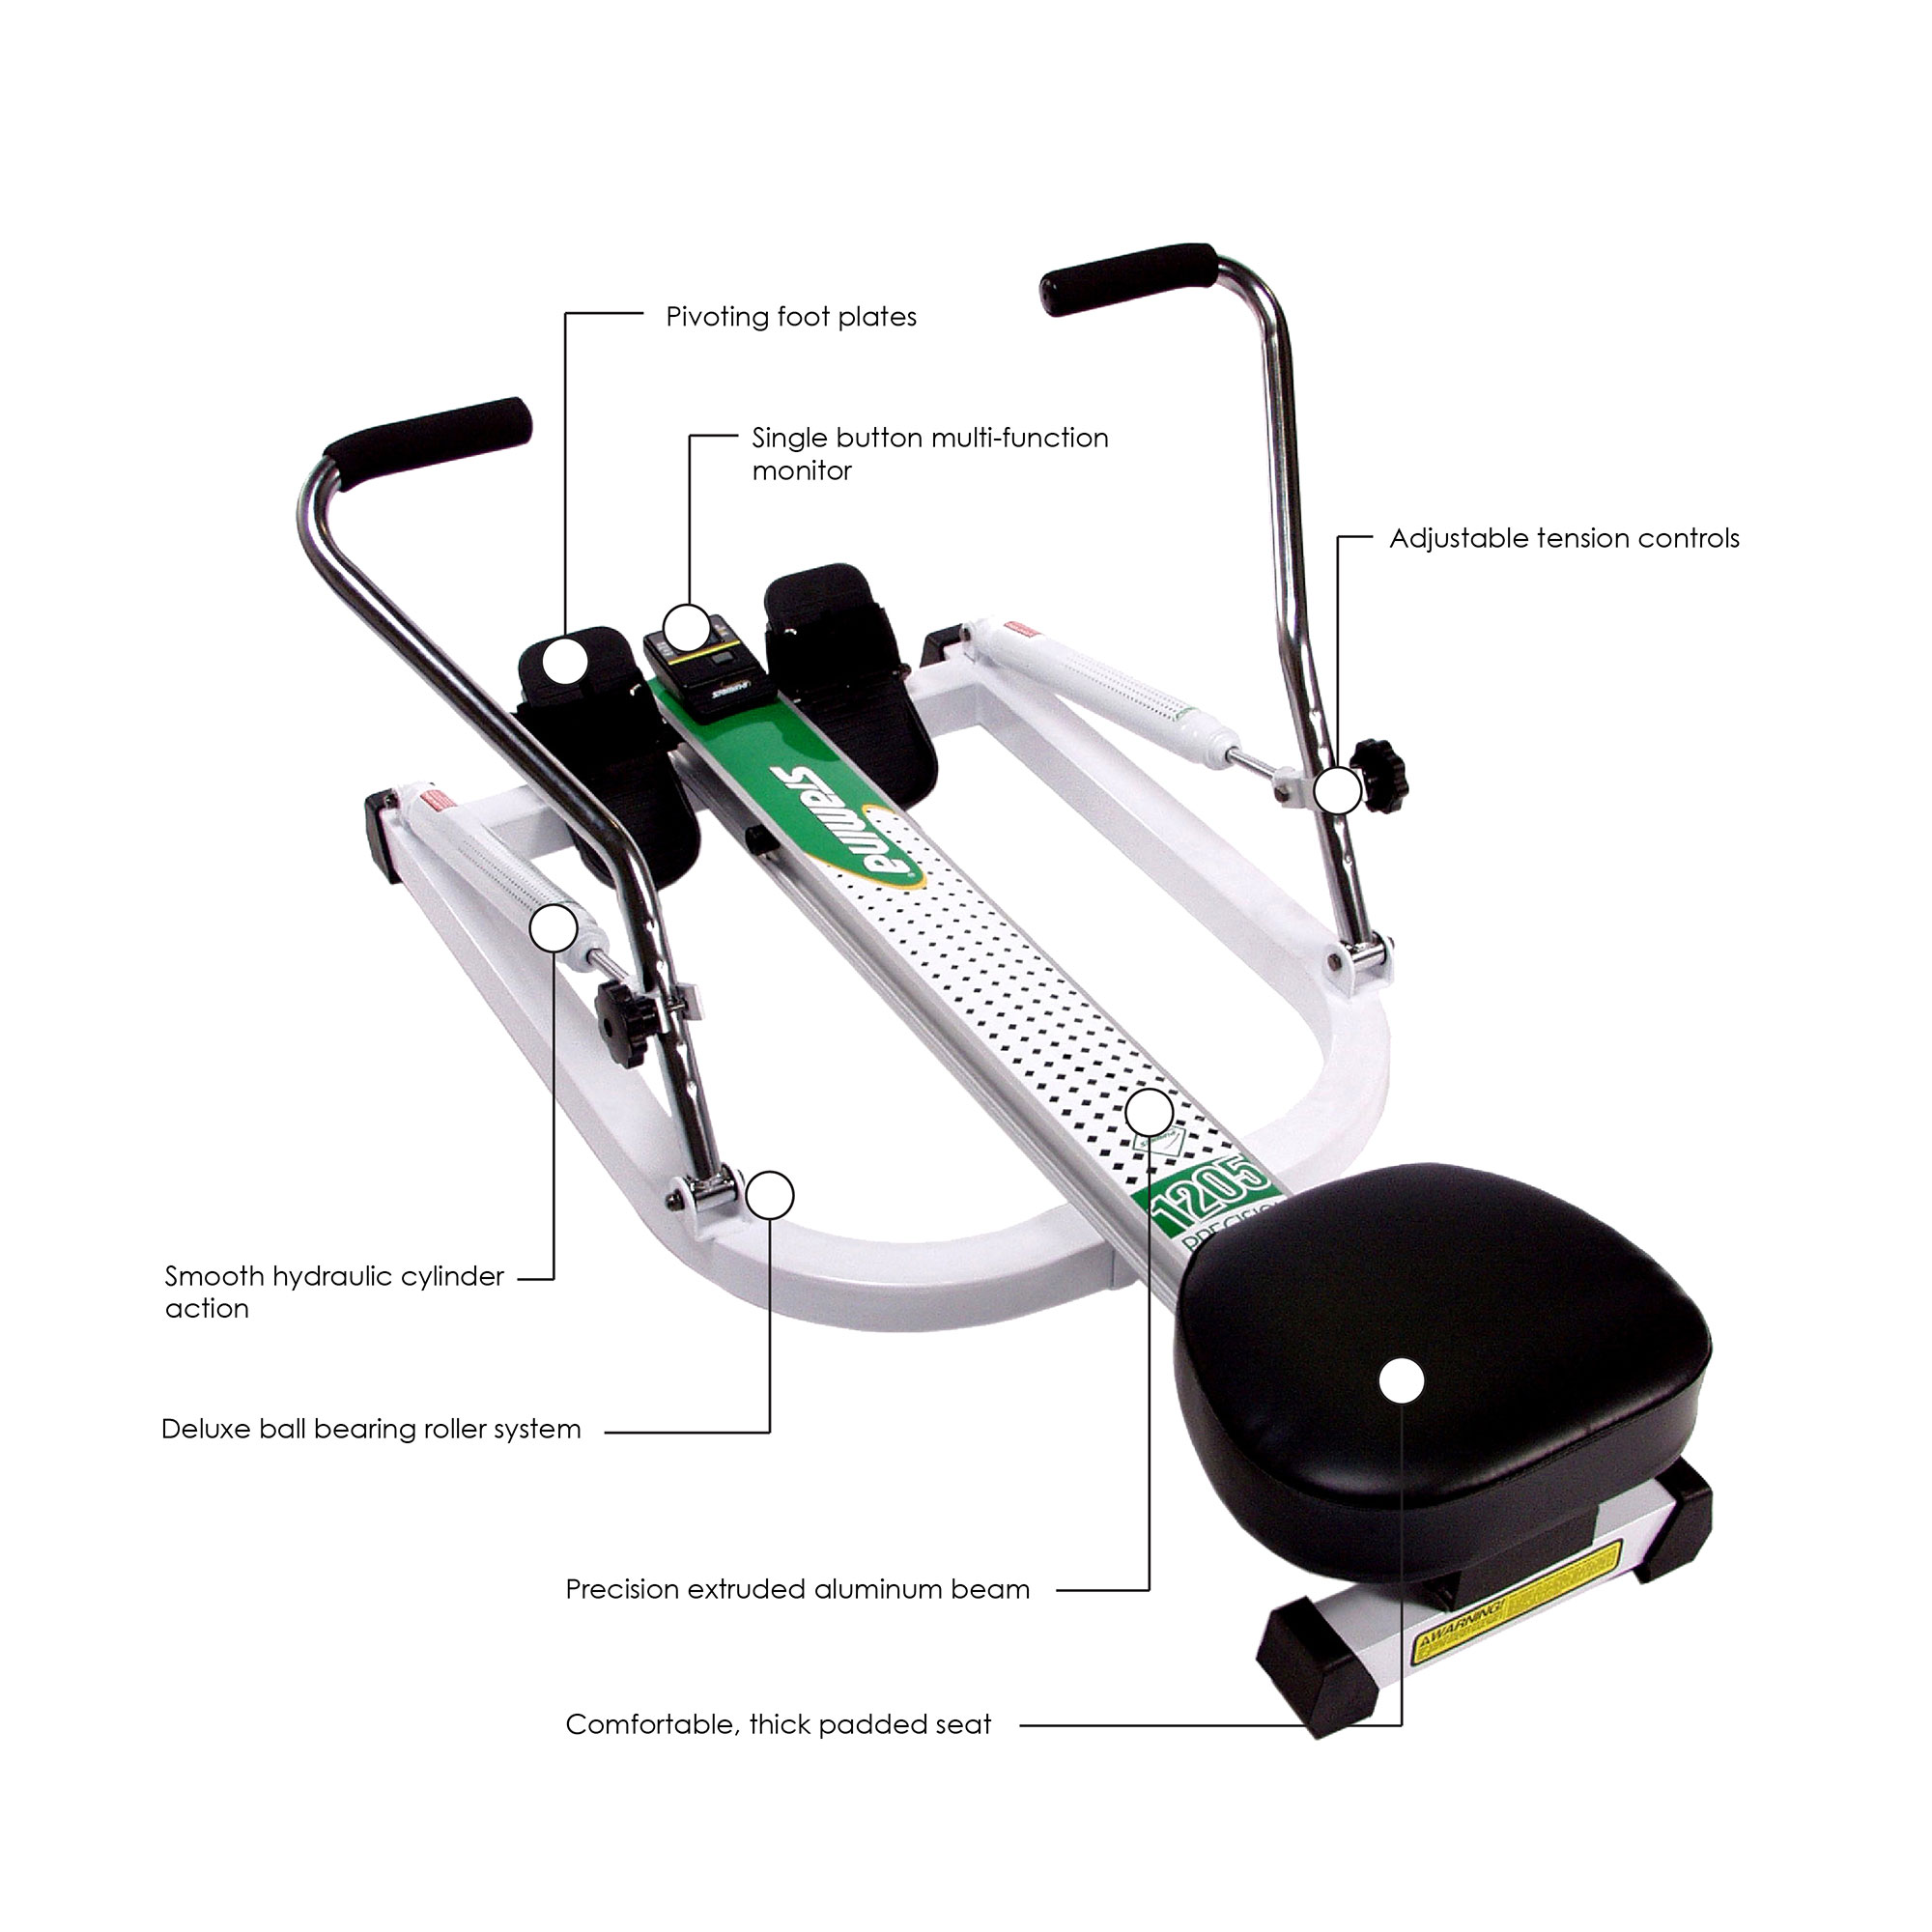 Stamina Products 35-1205 Low Impact Home Fitness Precision Rowing Machine - image 5 of 6